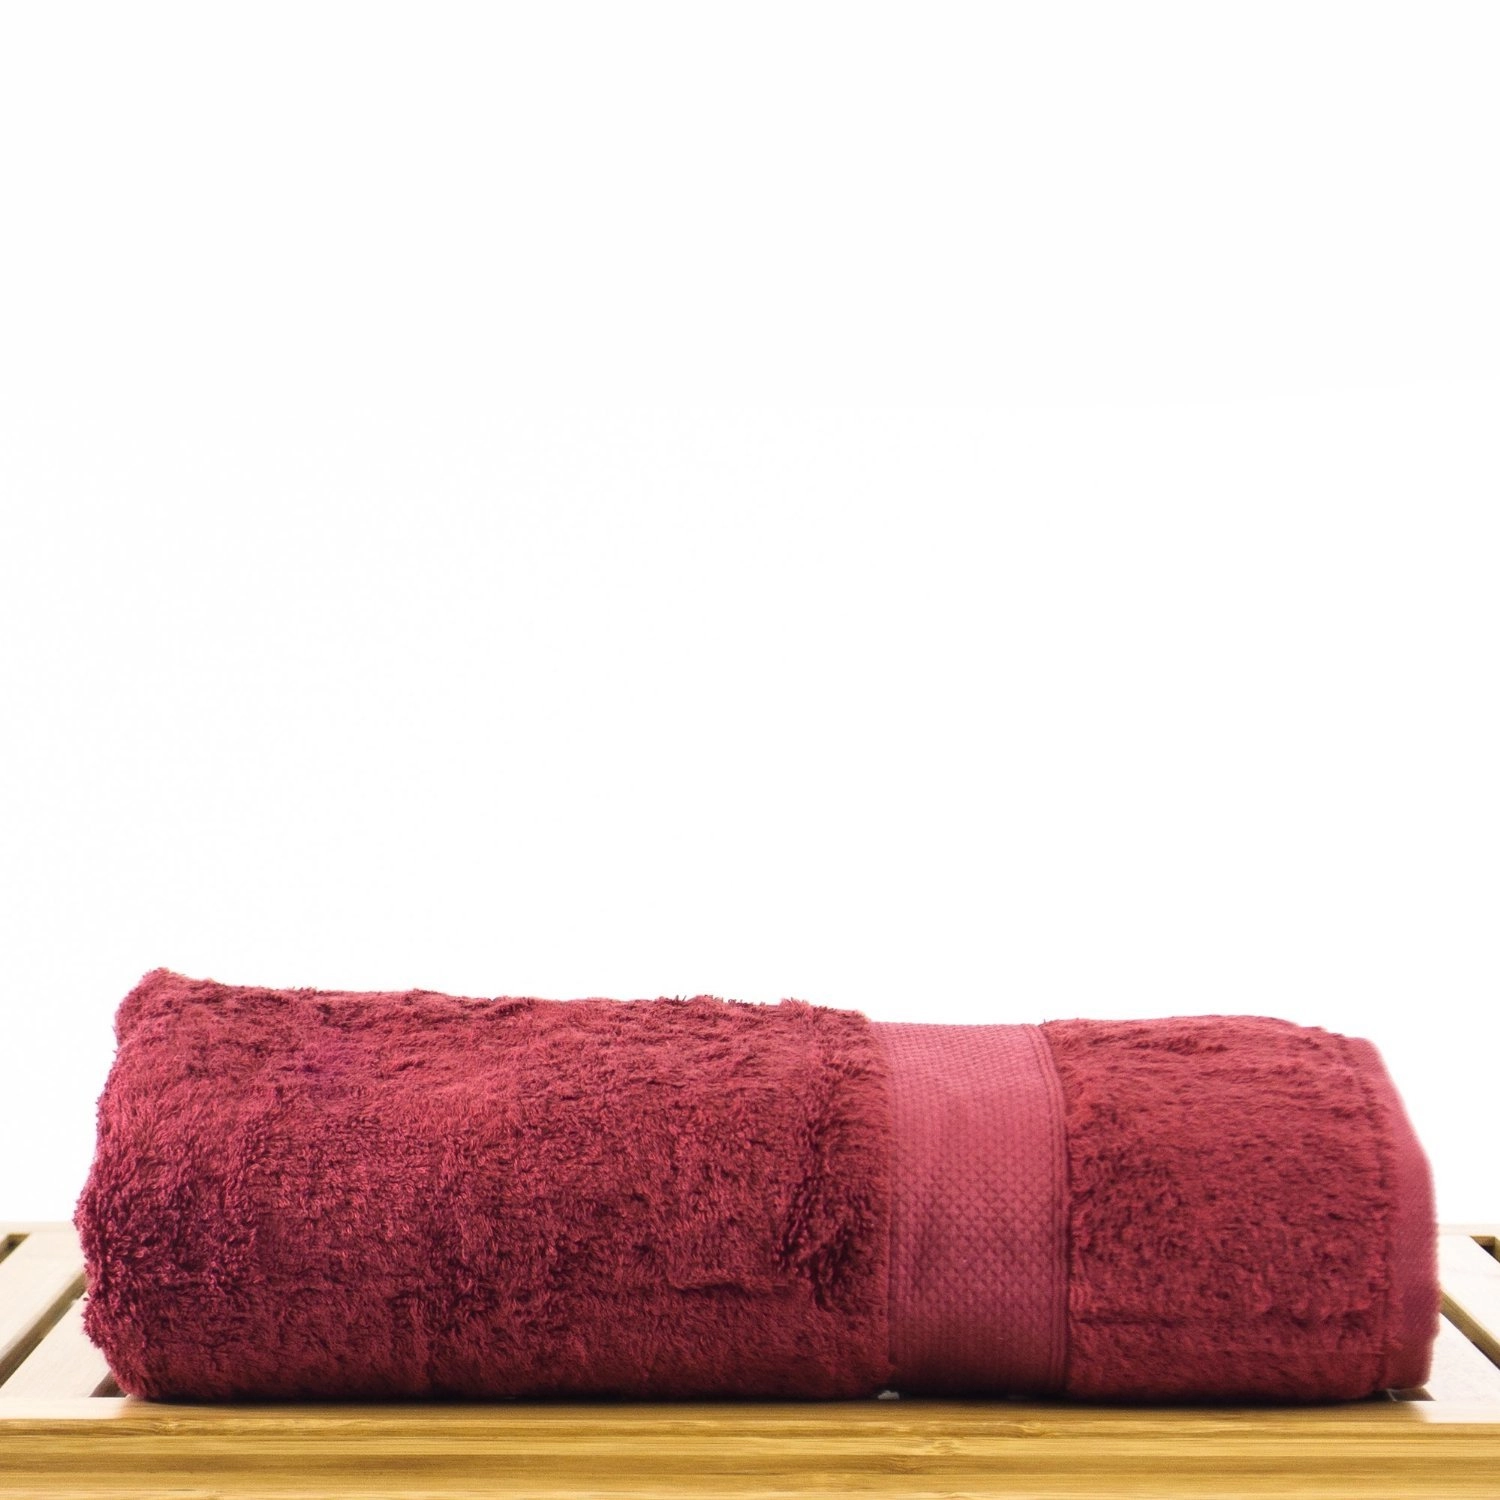 https://robemart.com/images/thumbnails/detailed/1/Luxury-Hotel-Spa-Towel-Soft-Turkish-Cotton-Bamboo-Rayon-Cranberry-Red-Bath-Towel-Chakir-Linen5.webp